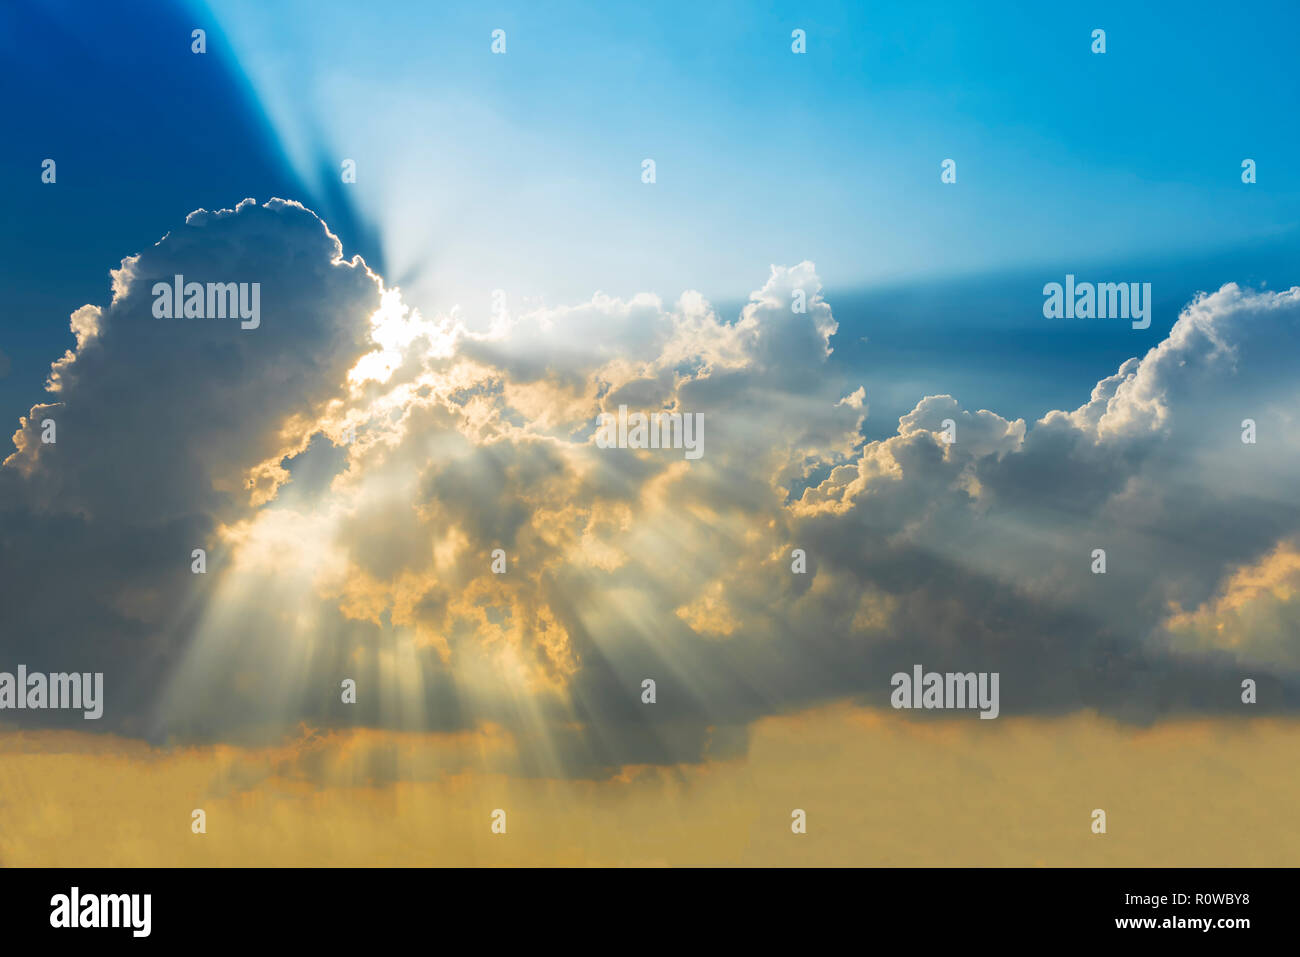 Sunset sky with cloud and sun ray. Nature background. Miracle, hope, or amazing nature concept. Stock Photo